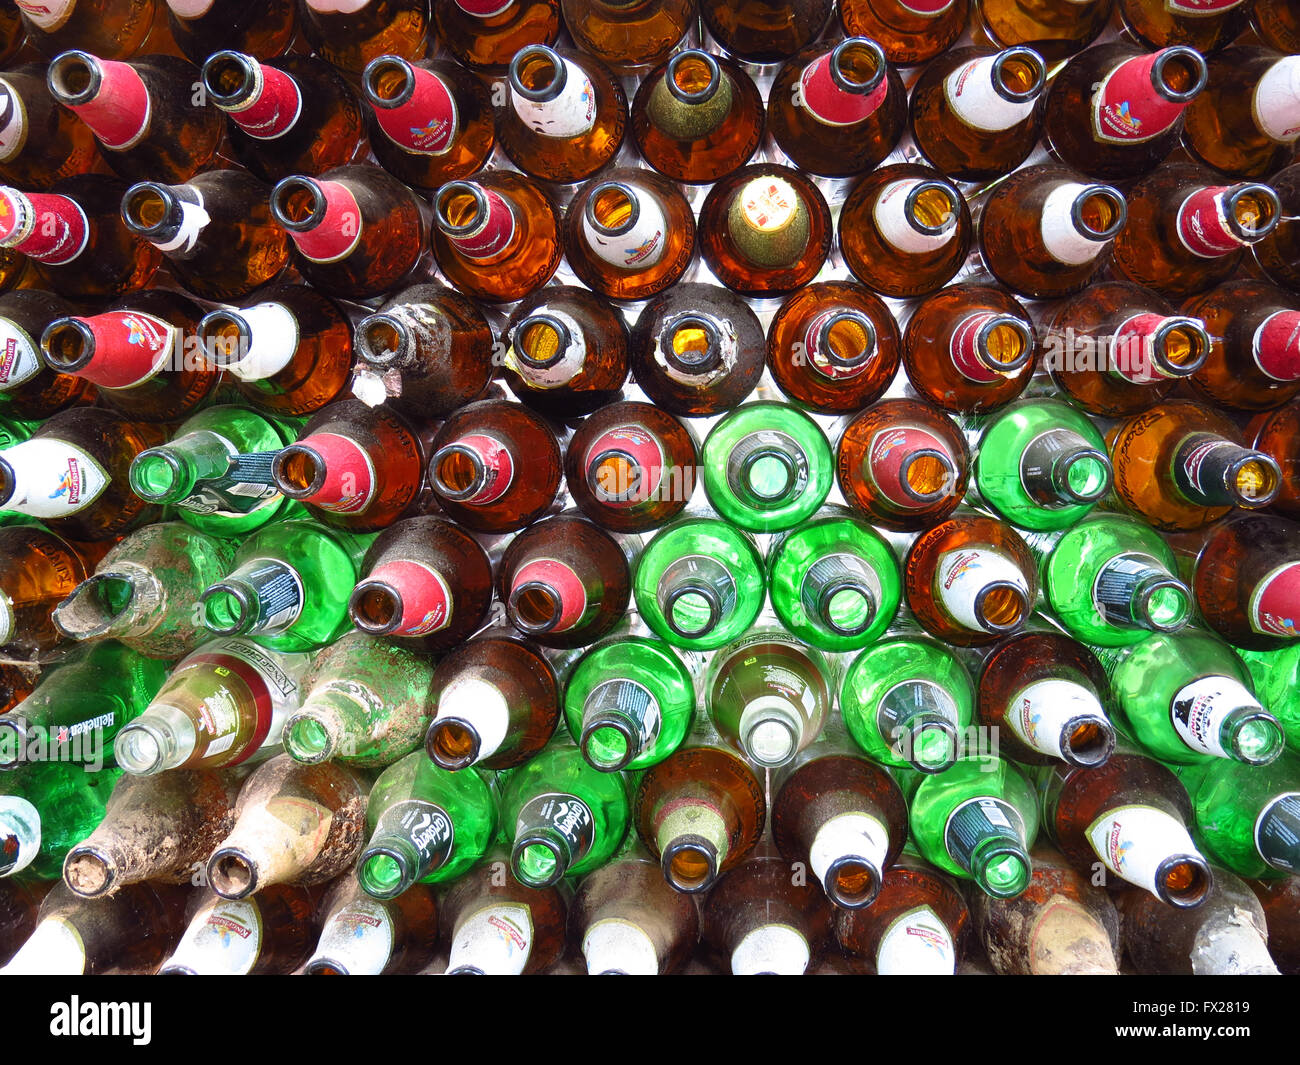 A background of beer bottles with their open side facing the camera. Stock Photo